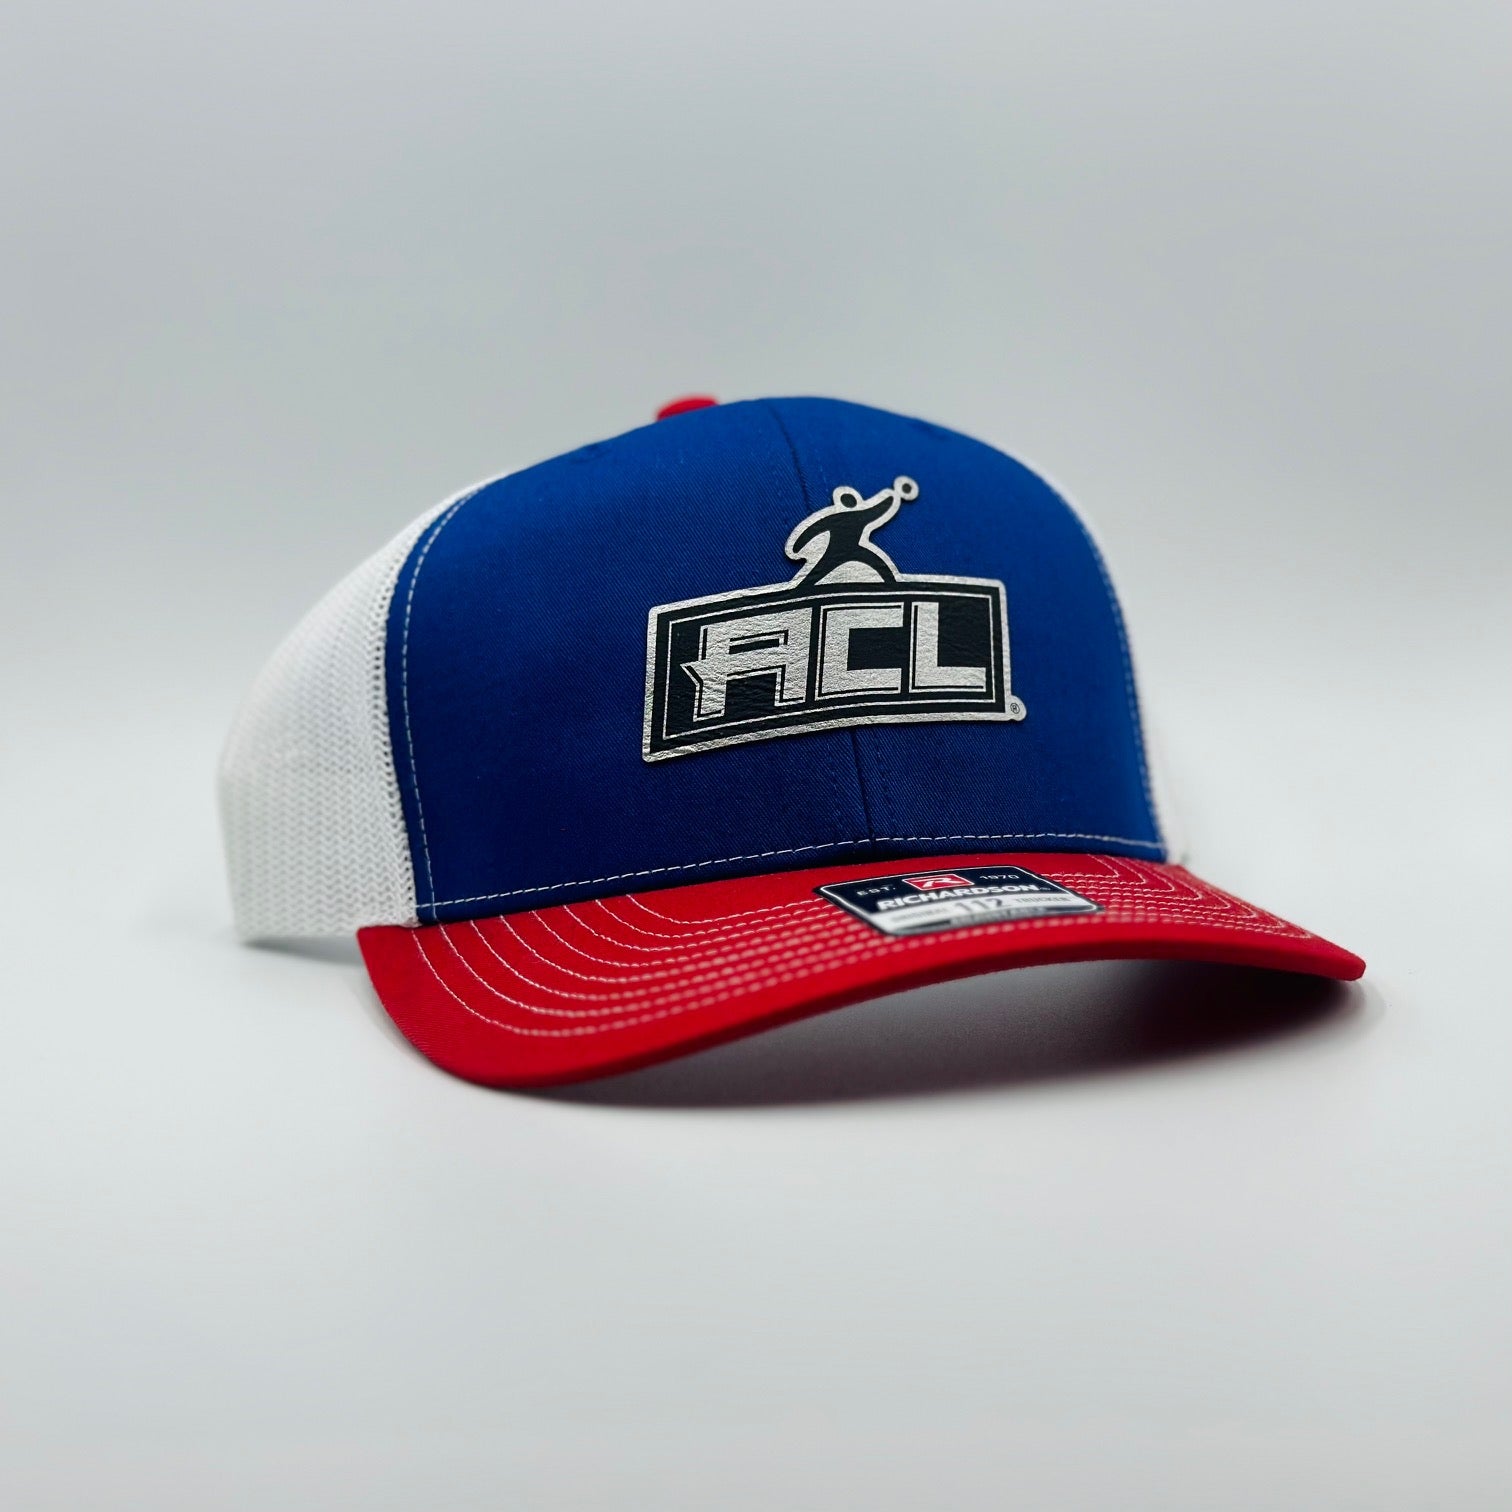 Blue Tri Colored Hat With Sliver Patch